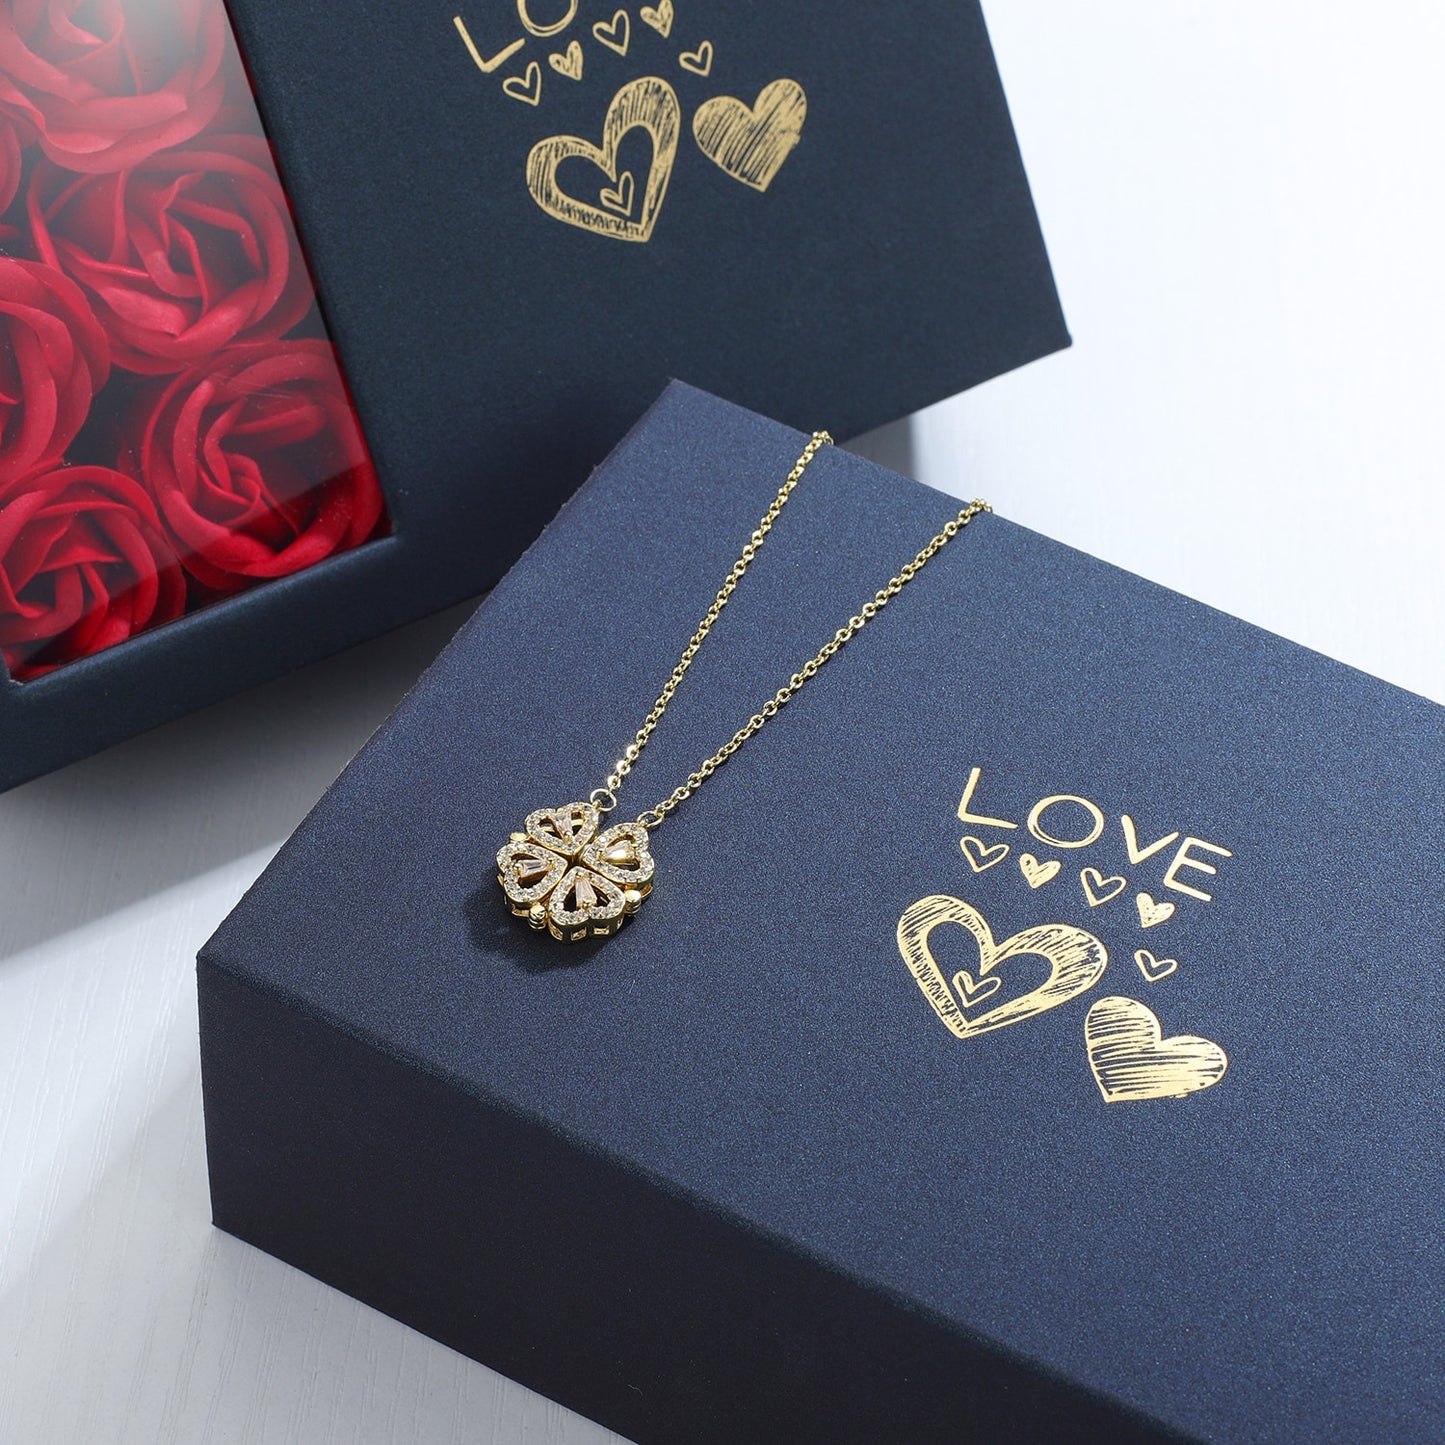 Rose Gift Box Heart Necklace